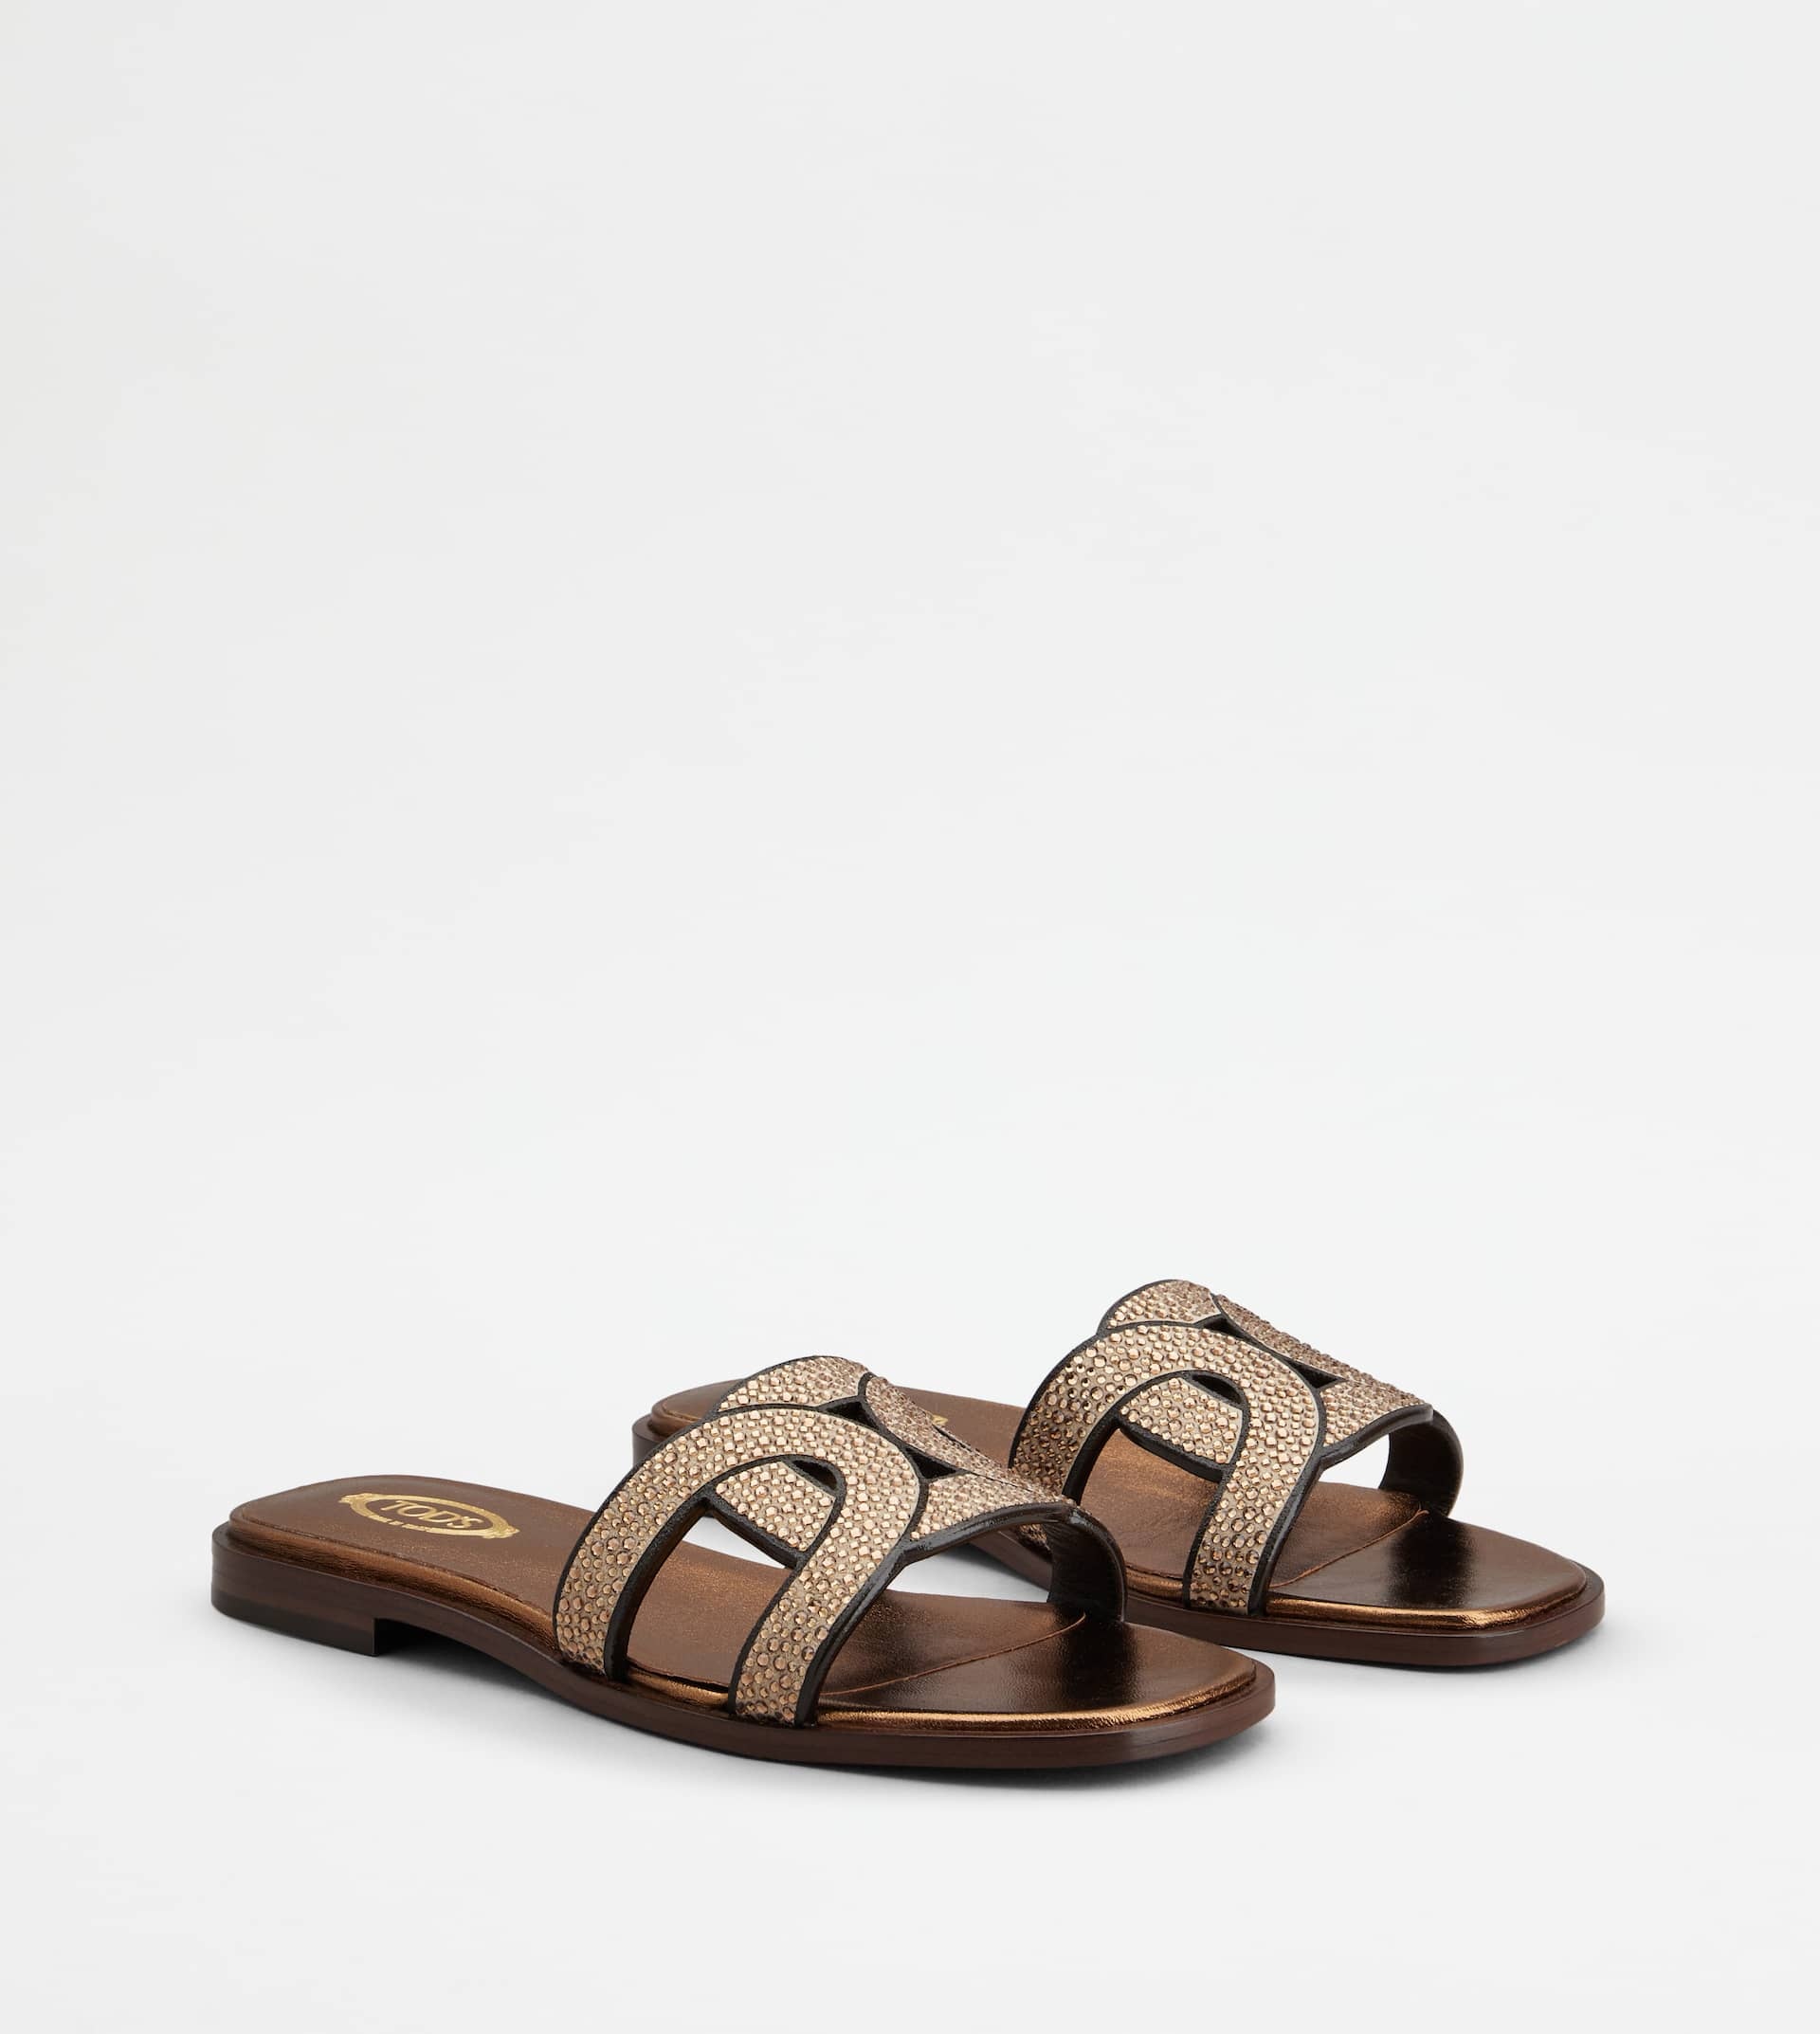 KATE SANDALS IN SUEDE - BROWN - 2